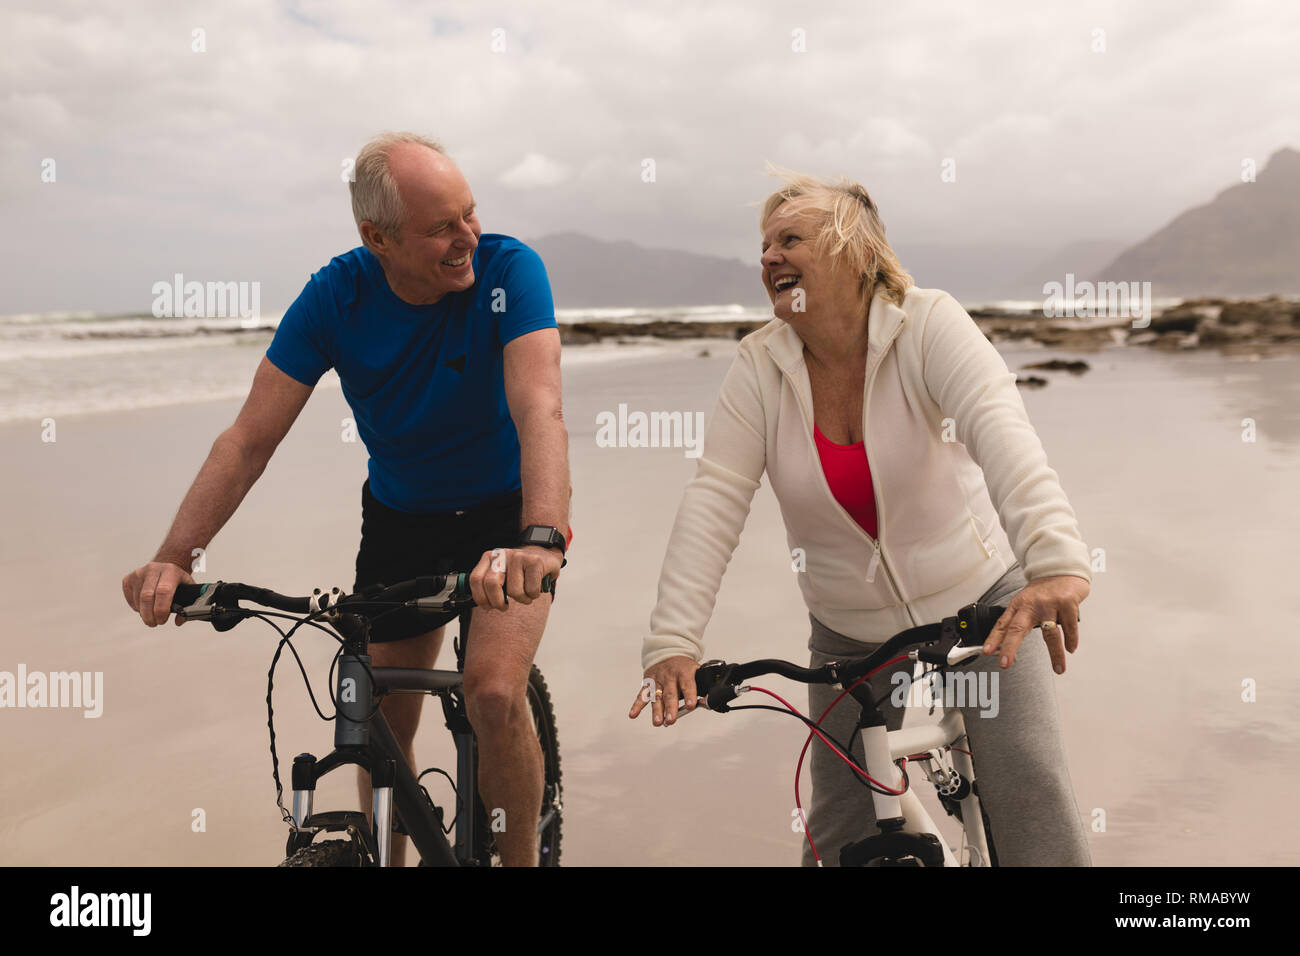 Senior couple riding a bicycle in a good mood on the beach Stock Photo